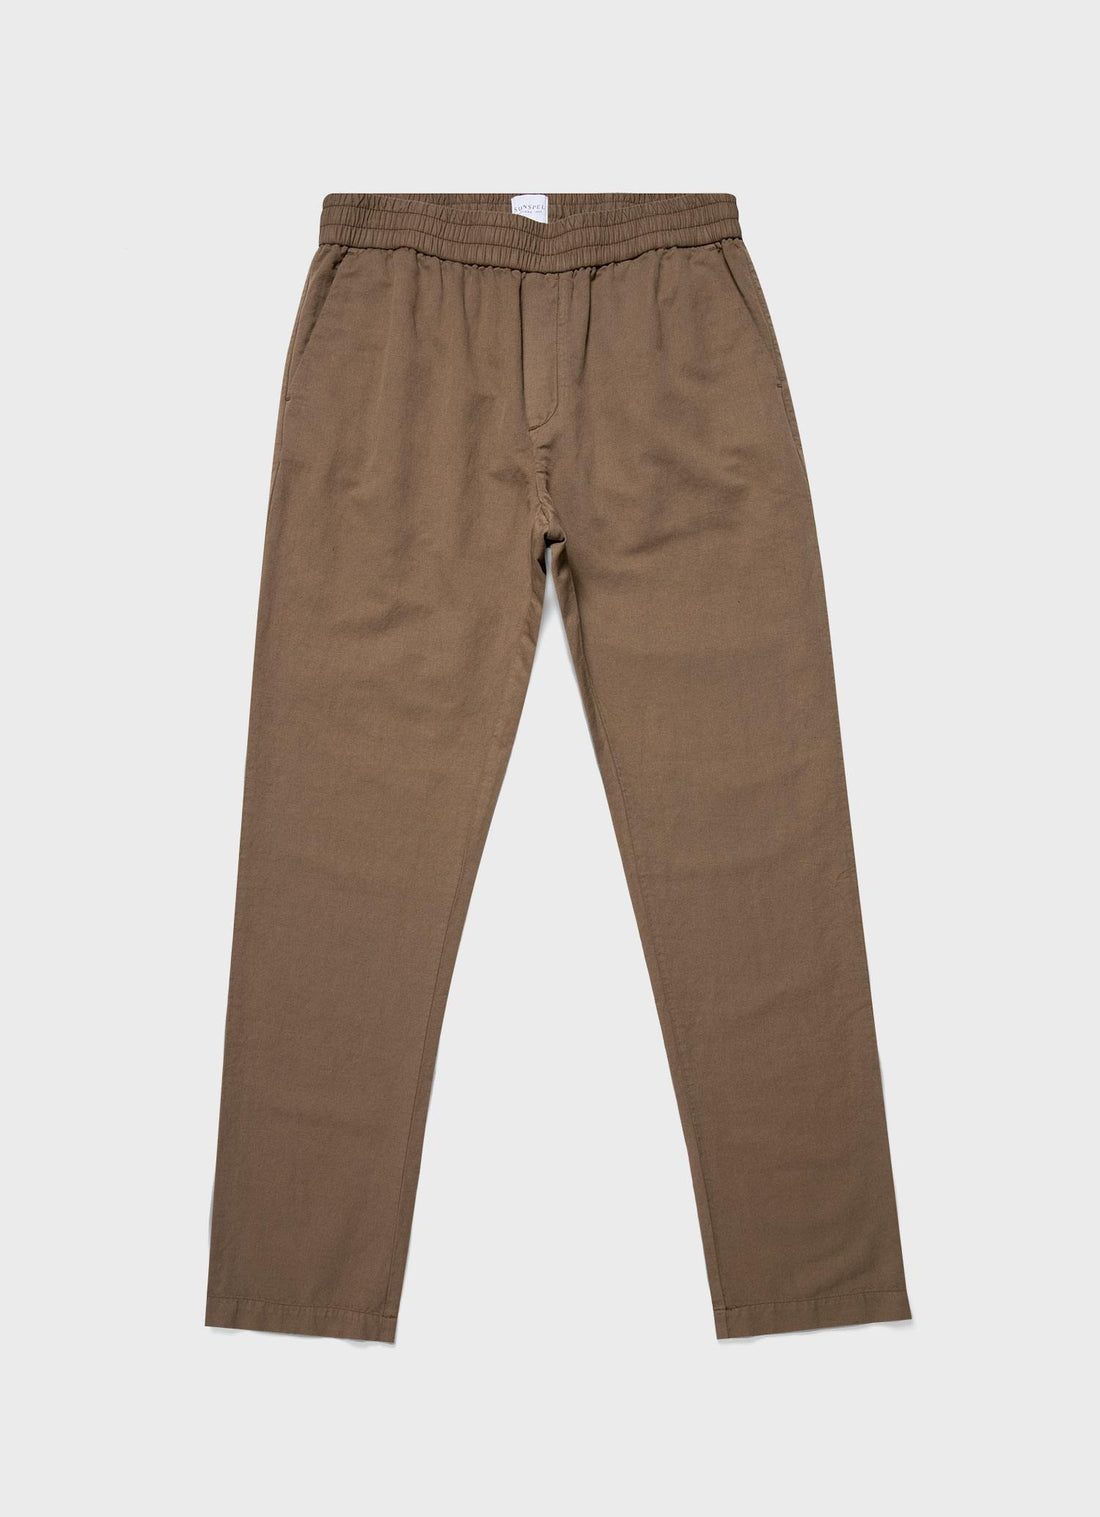 Cotton Pocket Drawstring Mid Weight Pant for Men